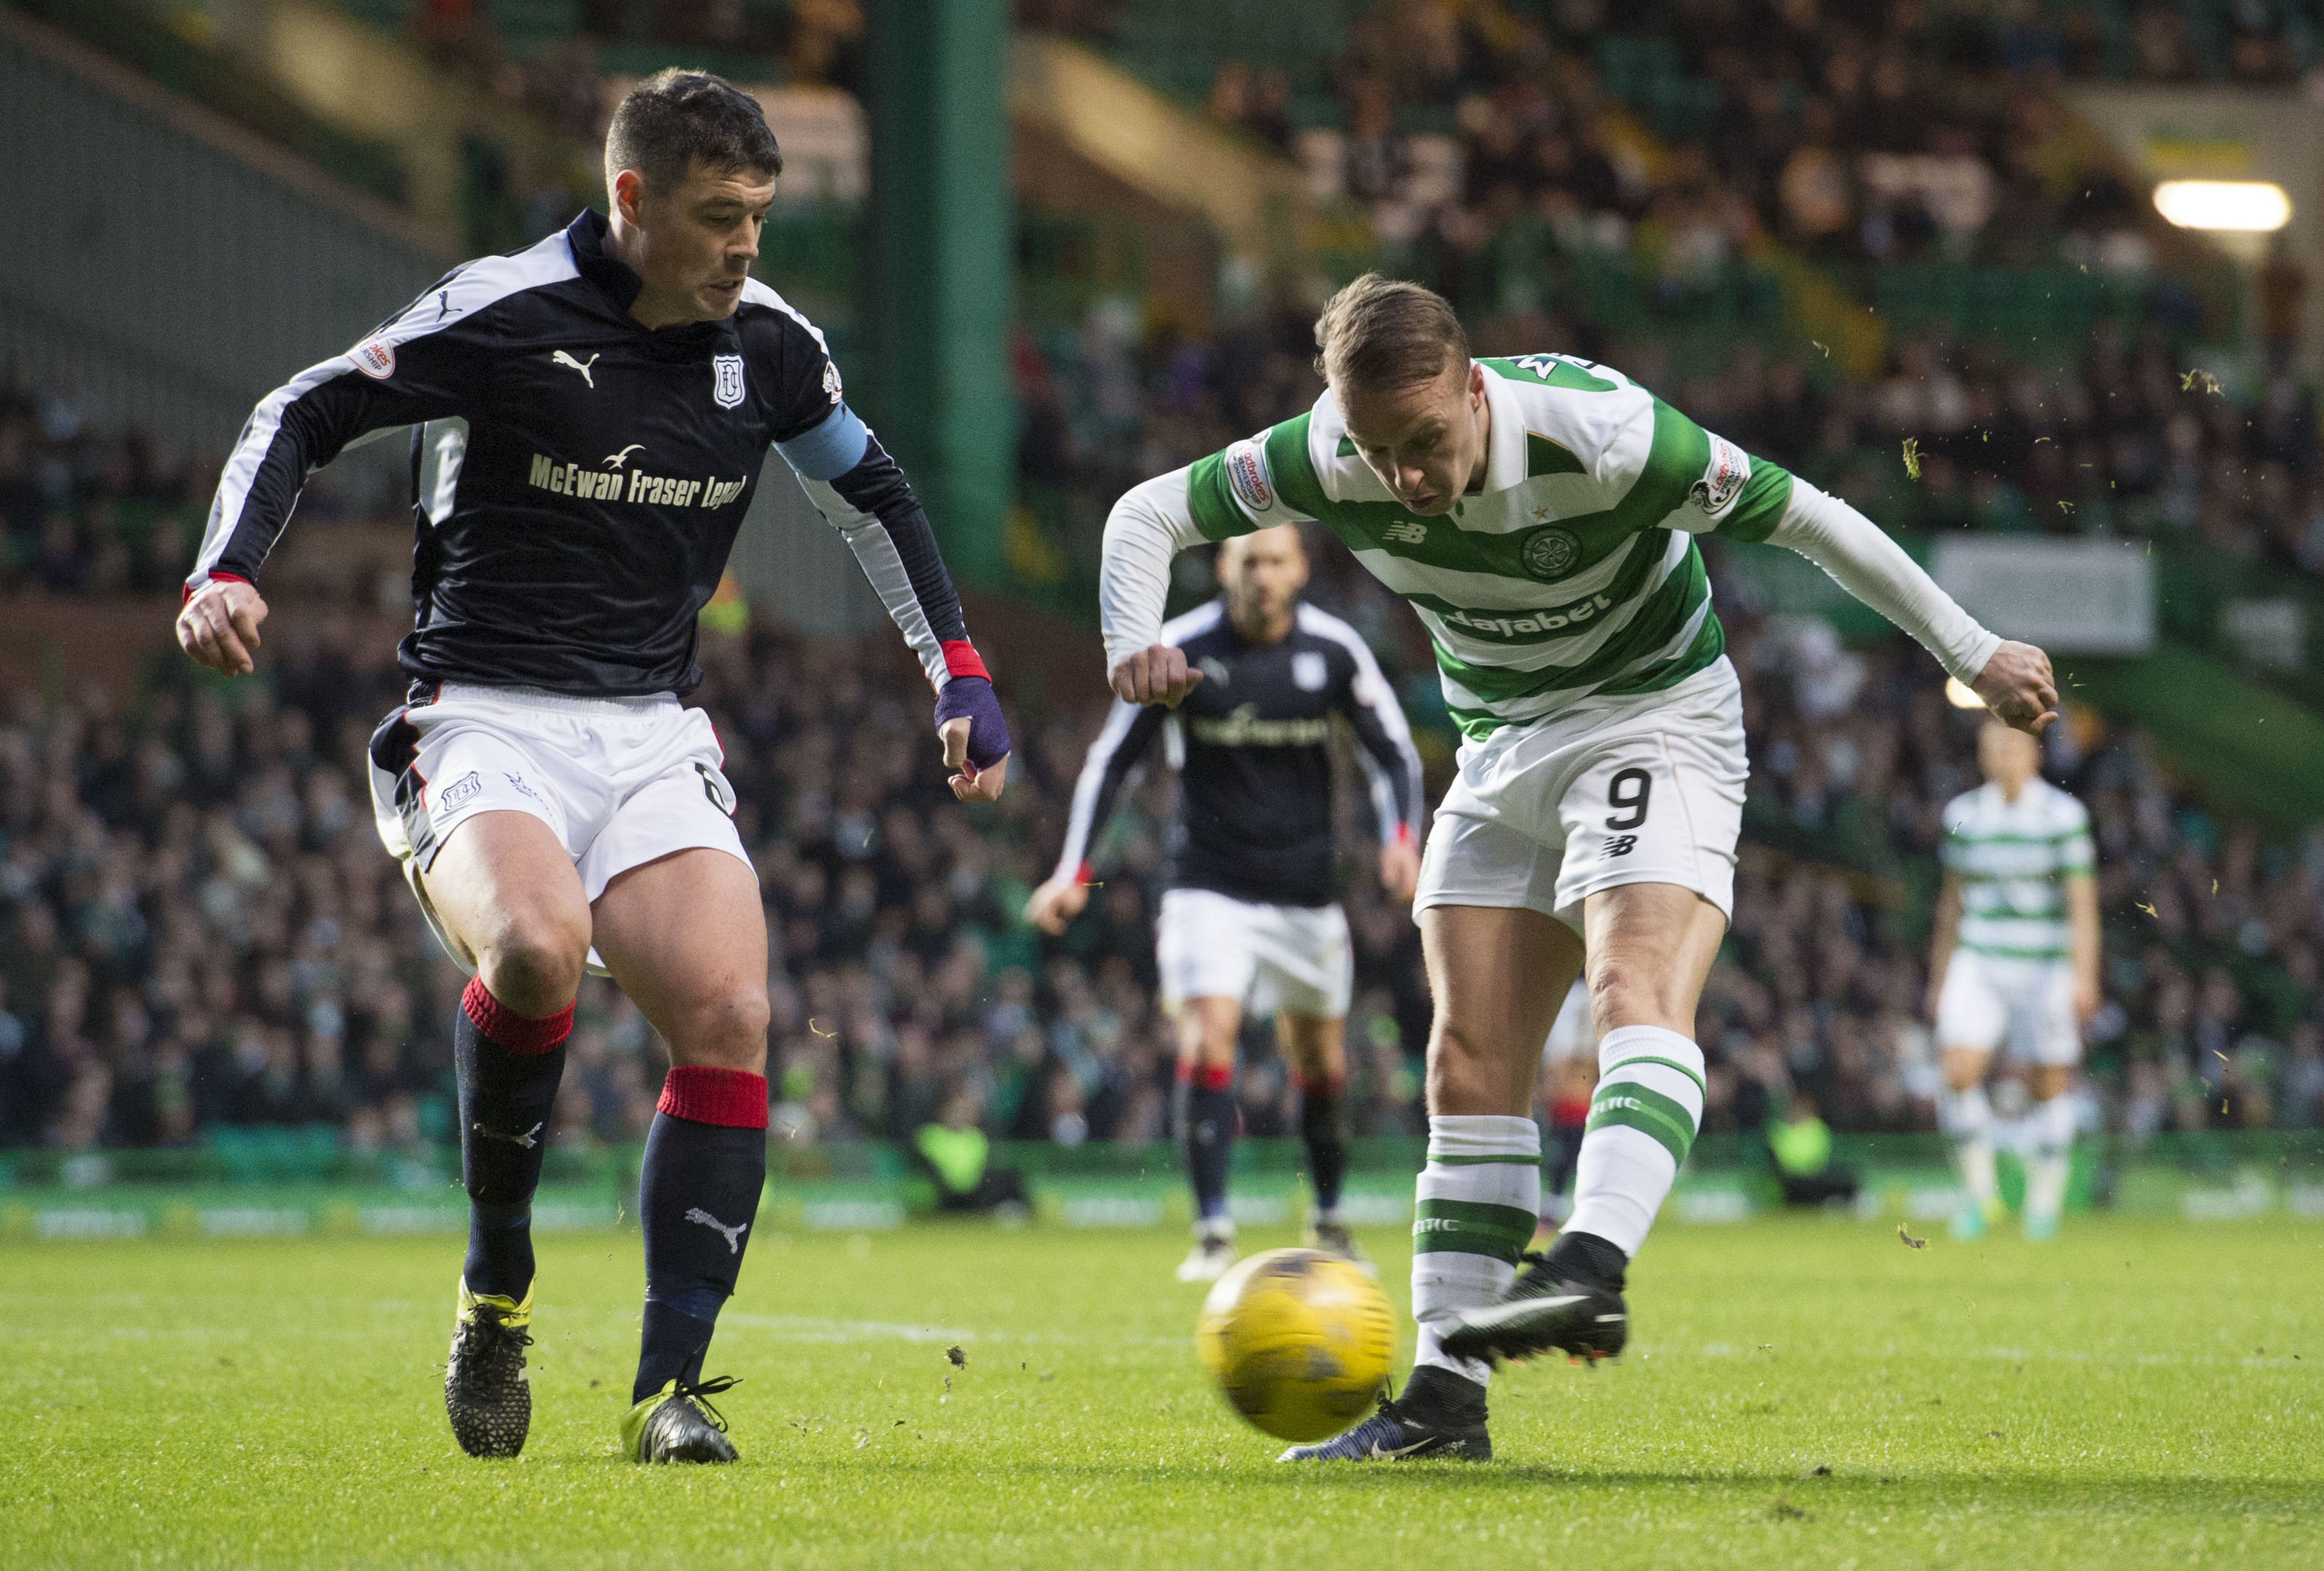 Celtic's Leigh Griffiths is closed down by Darren O'Dea.